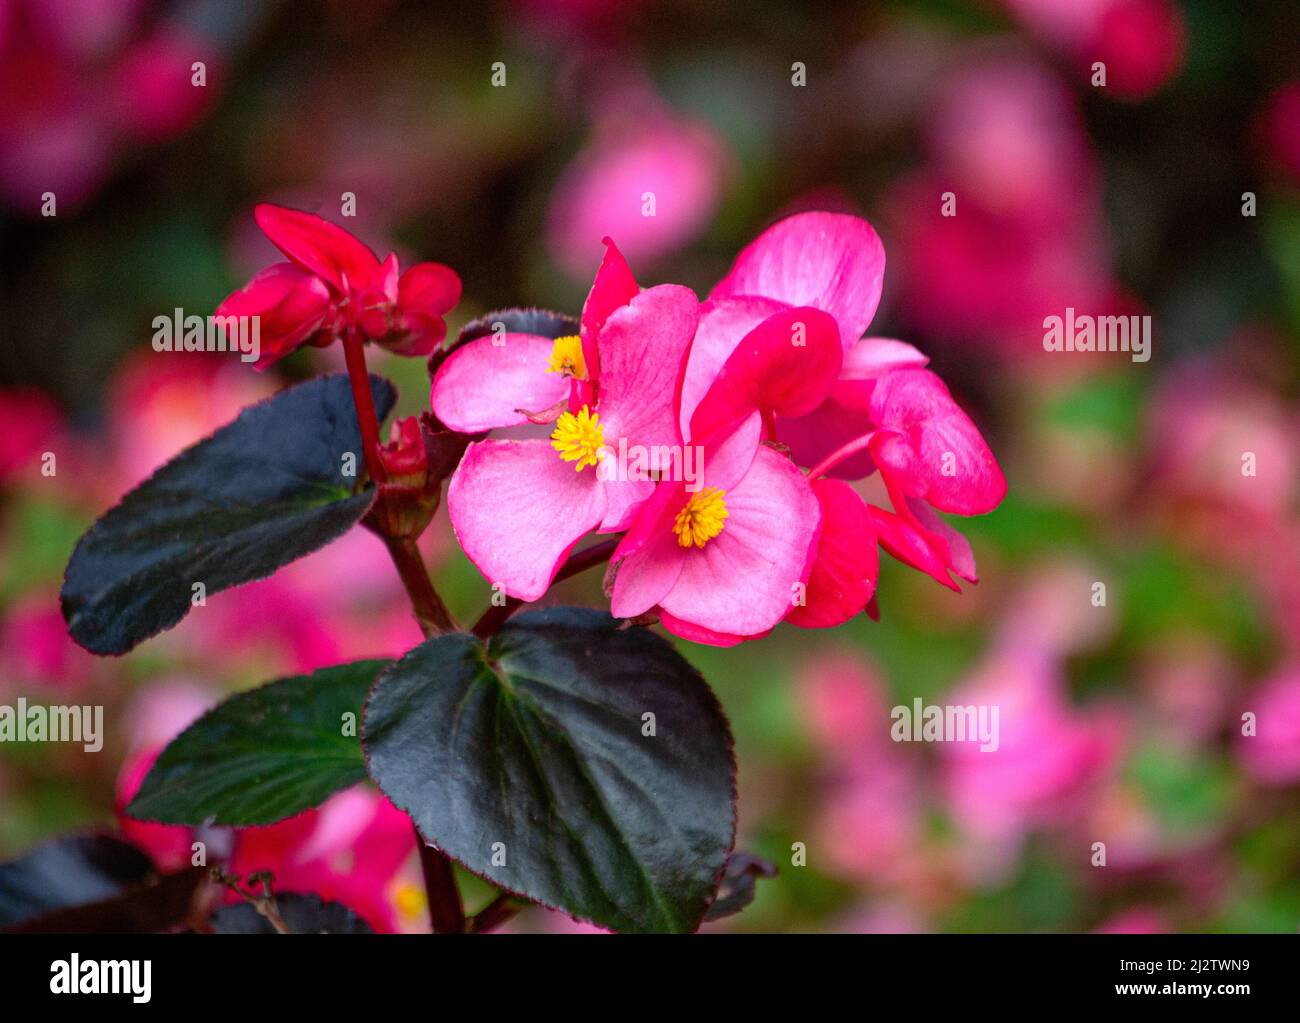 A flower bed of bright pink begonia flowers in the garden. Stock Photo